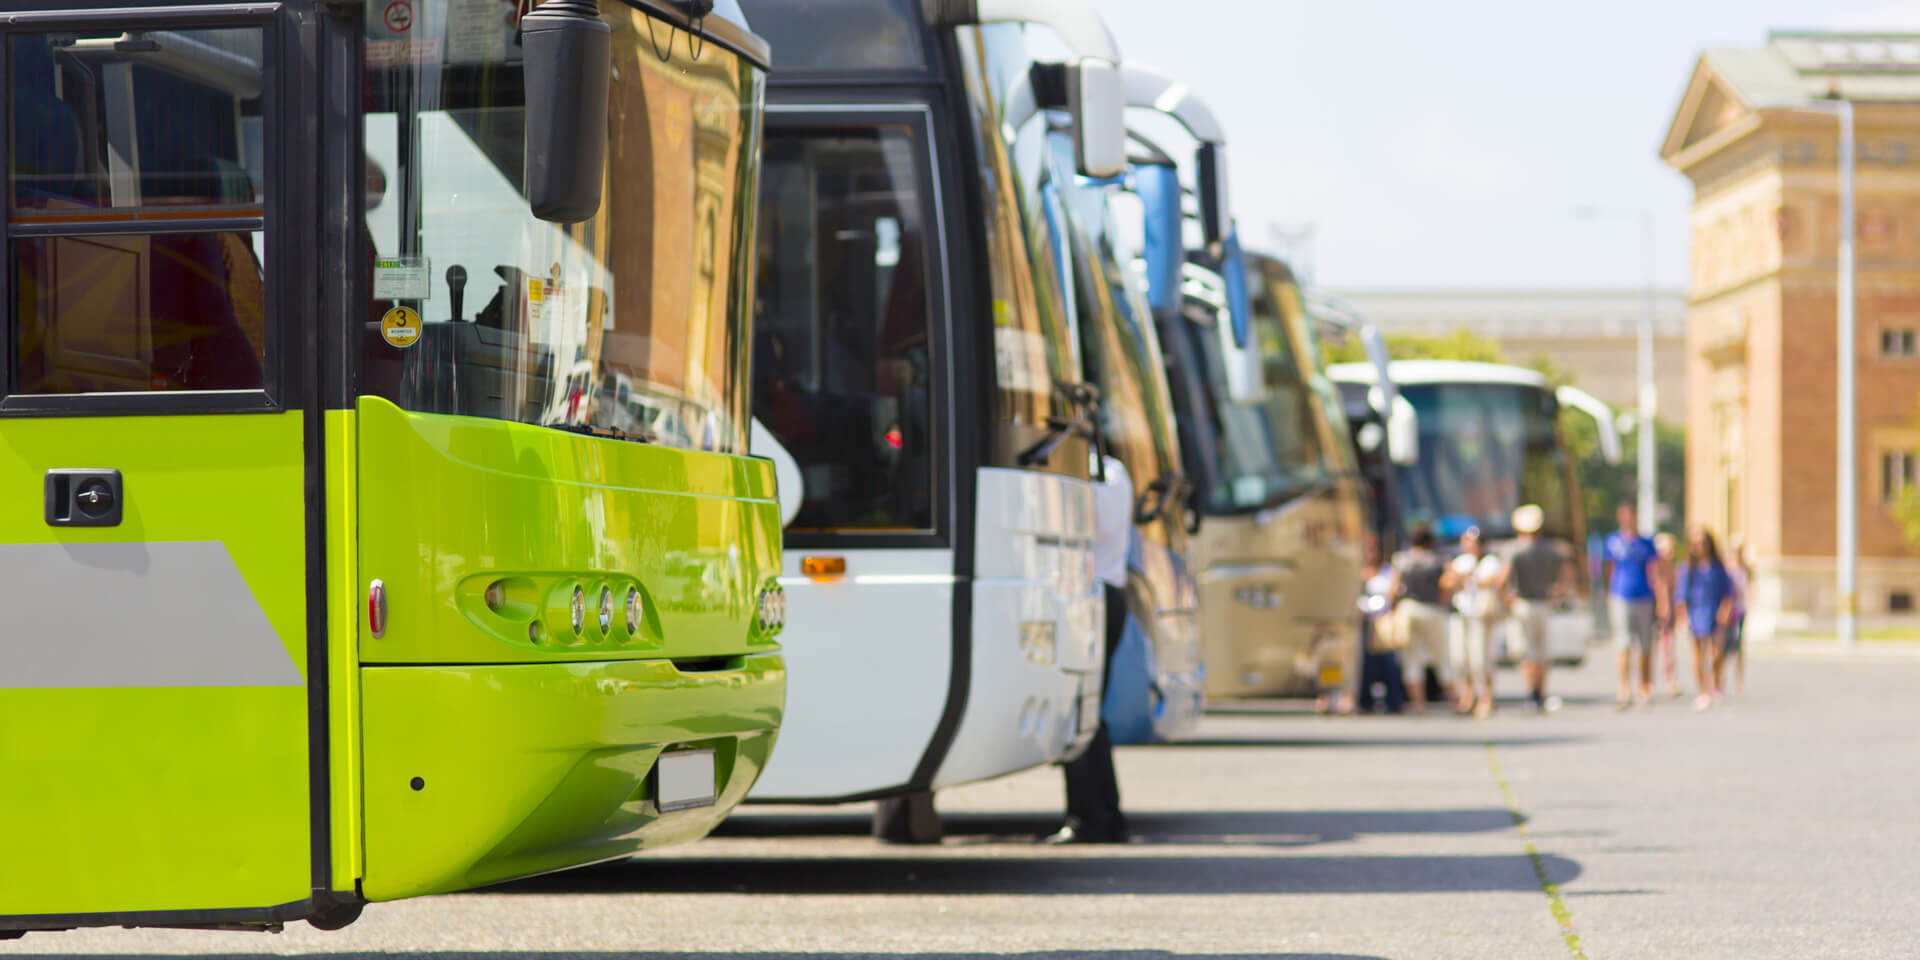 Factors You Should Consider with Bus Hire in Brisbane